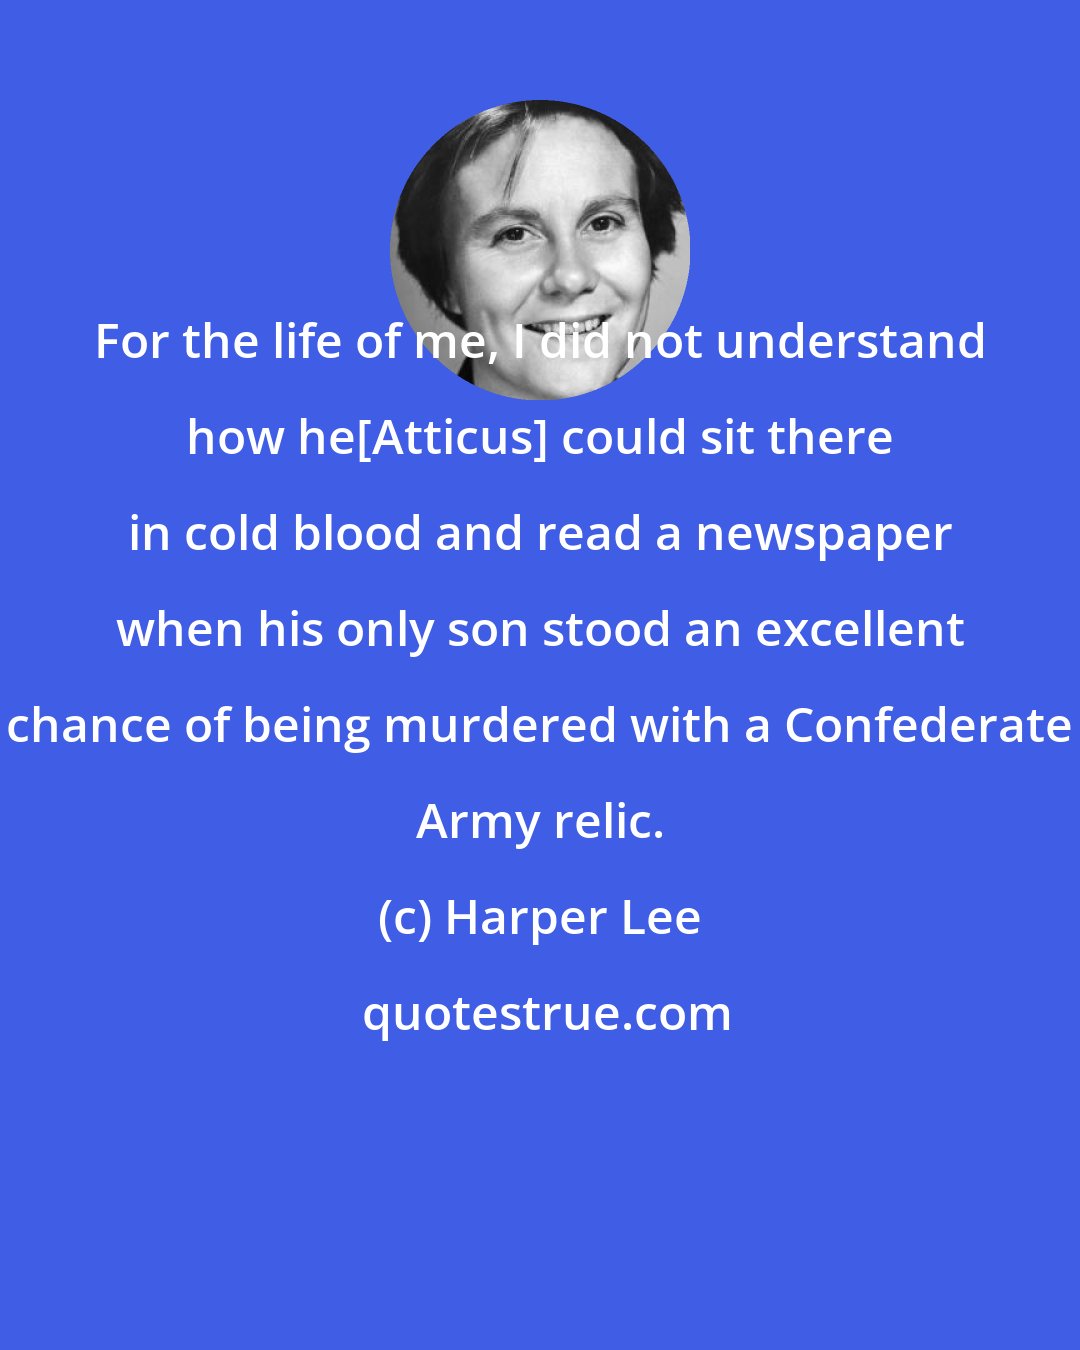 Harper Lee: For the life of me, I did not understand how he[Atticus] could sit there in cold blood and read a newspaper when his only son stood an excellent chance of being murdered with a Confederate Army relic.